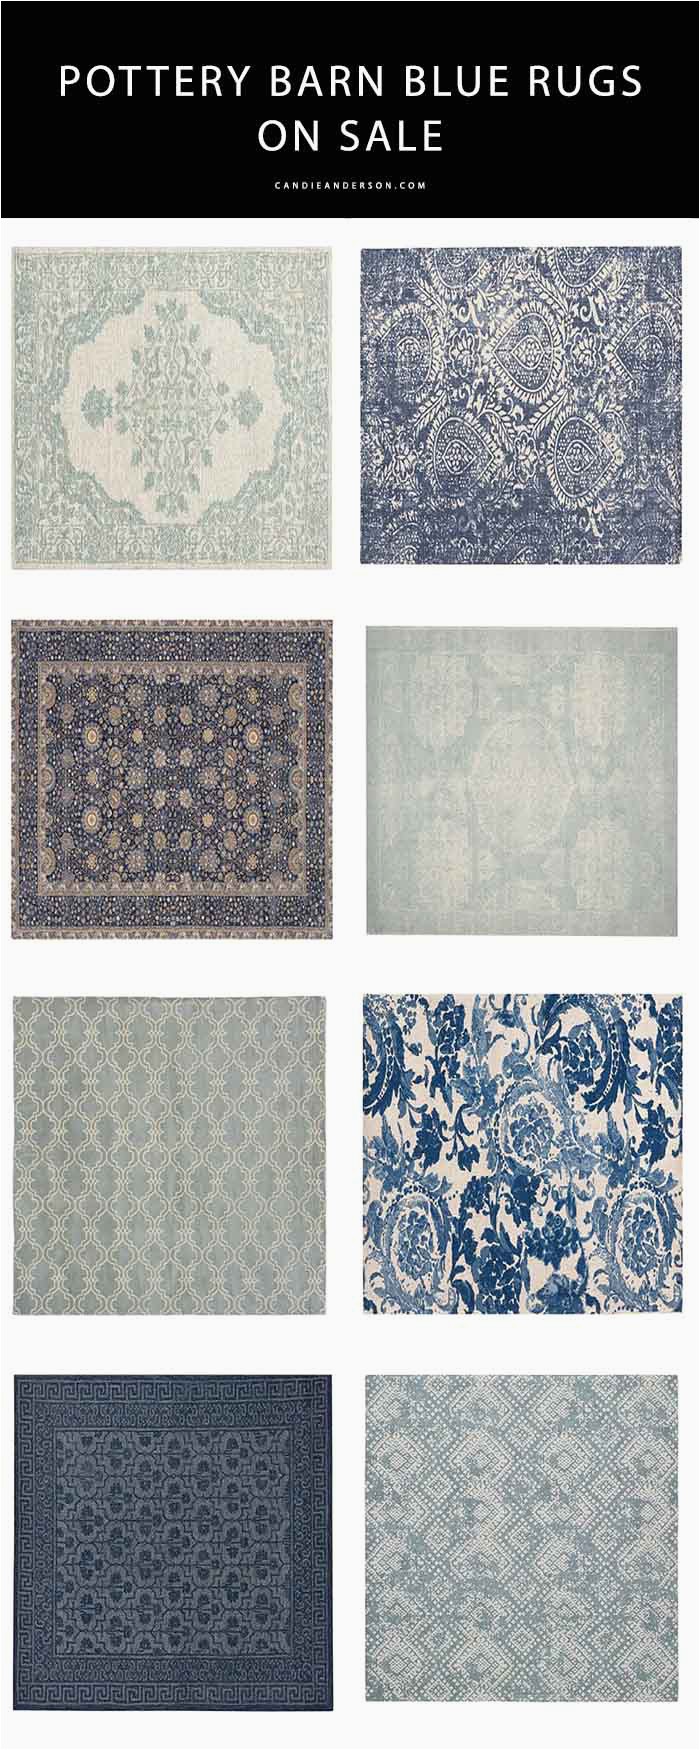 Carina Synthetic Rug Porcelain Blue 10 Trendy Blue Pottery Barn Rugs Sale